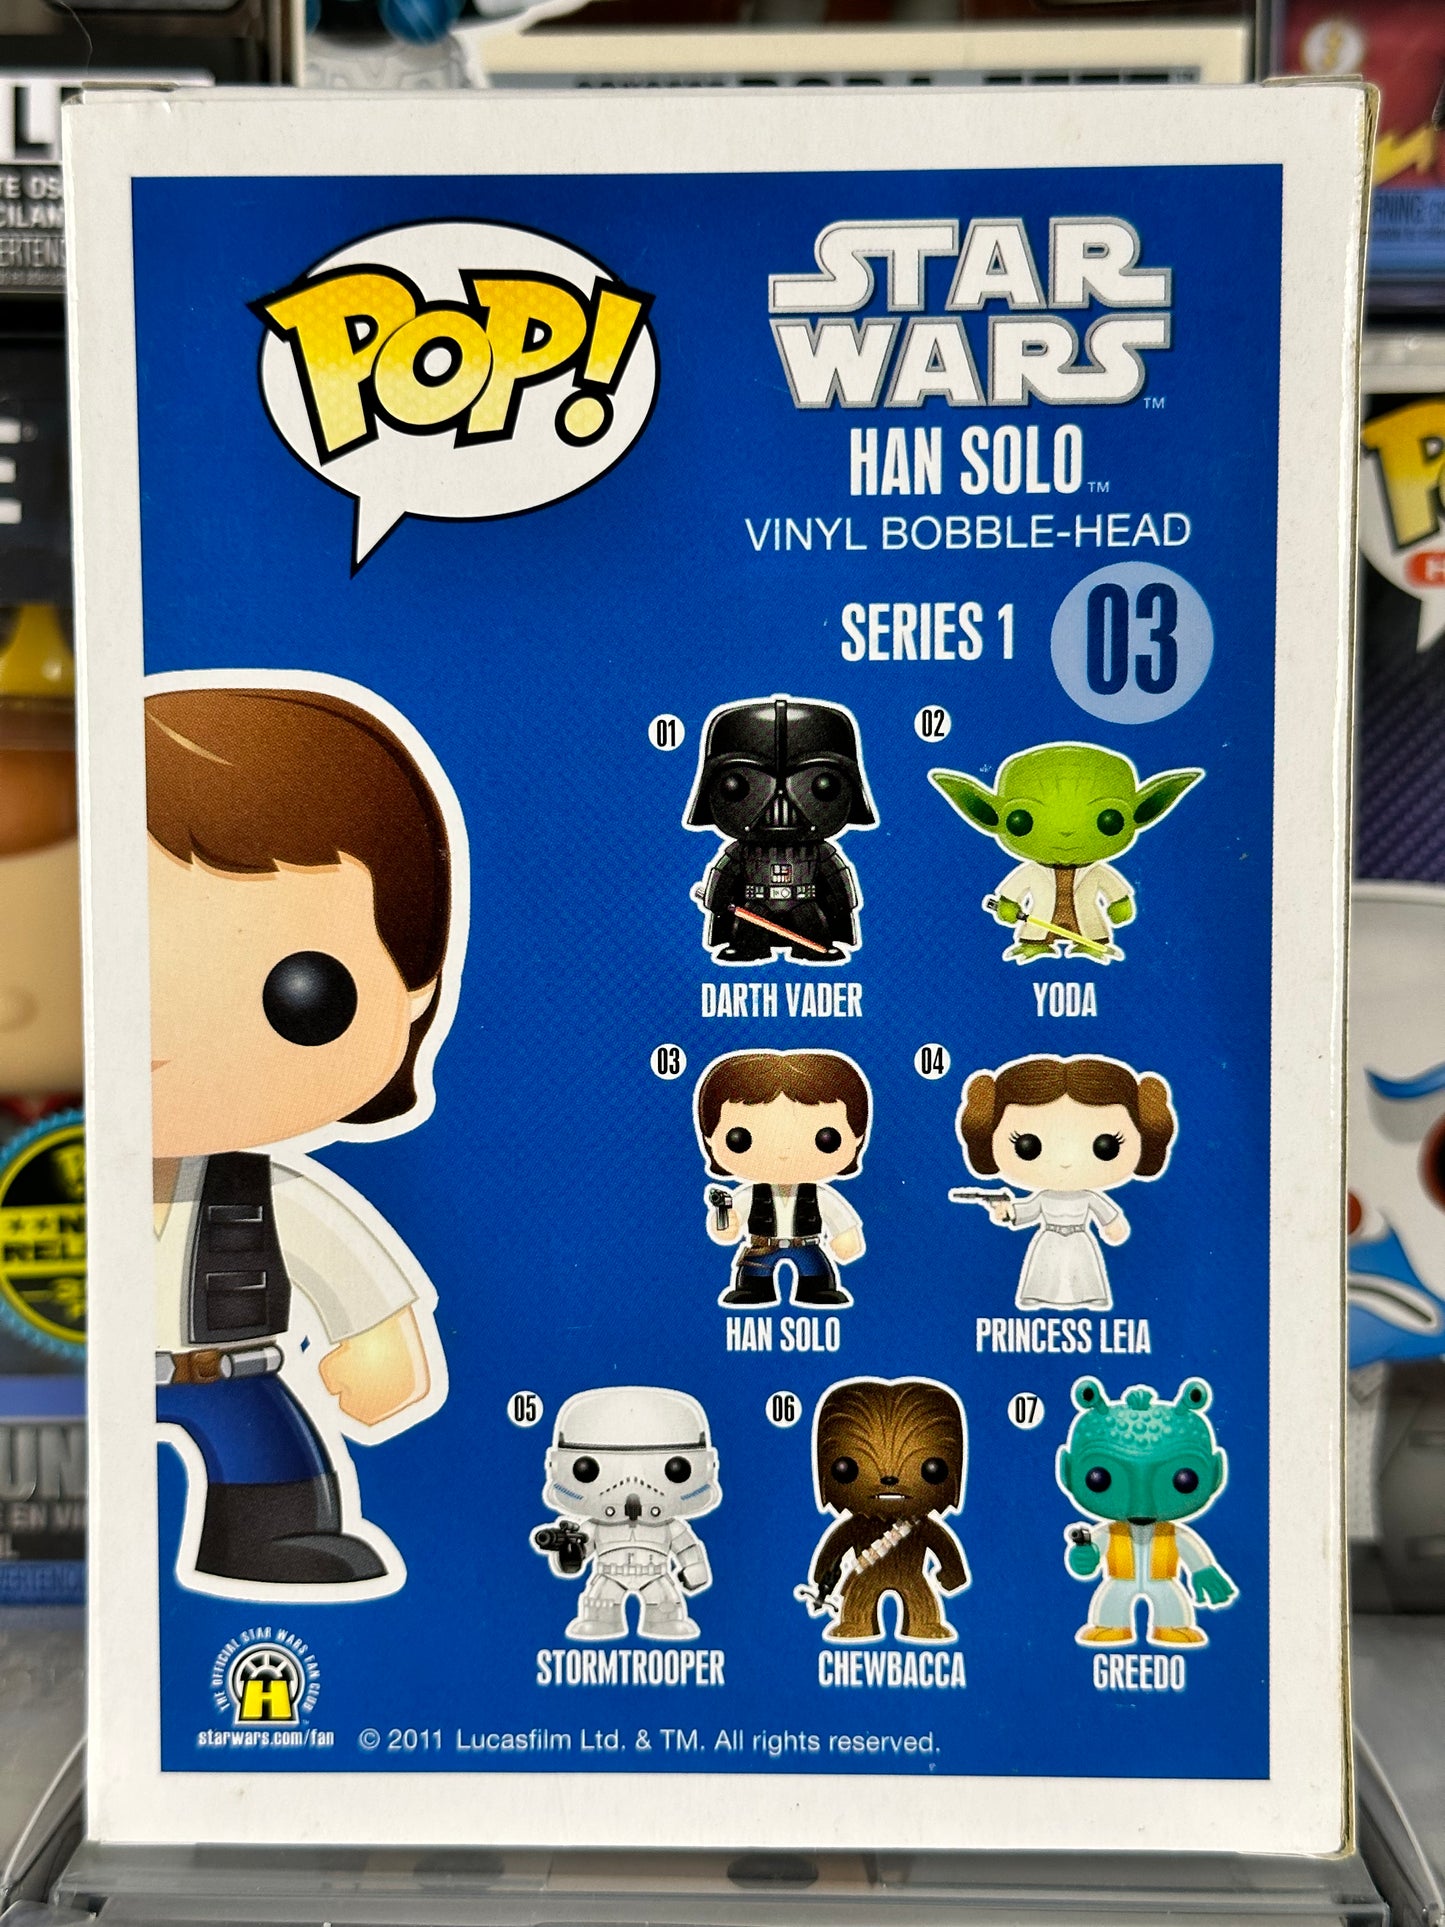 Star Wars - Han Solo (03) (Blue Box, Large Font, 1st Release) Vaulted